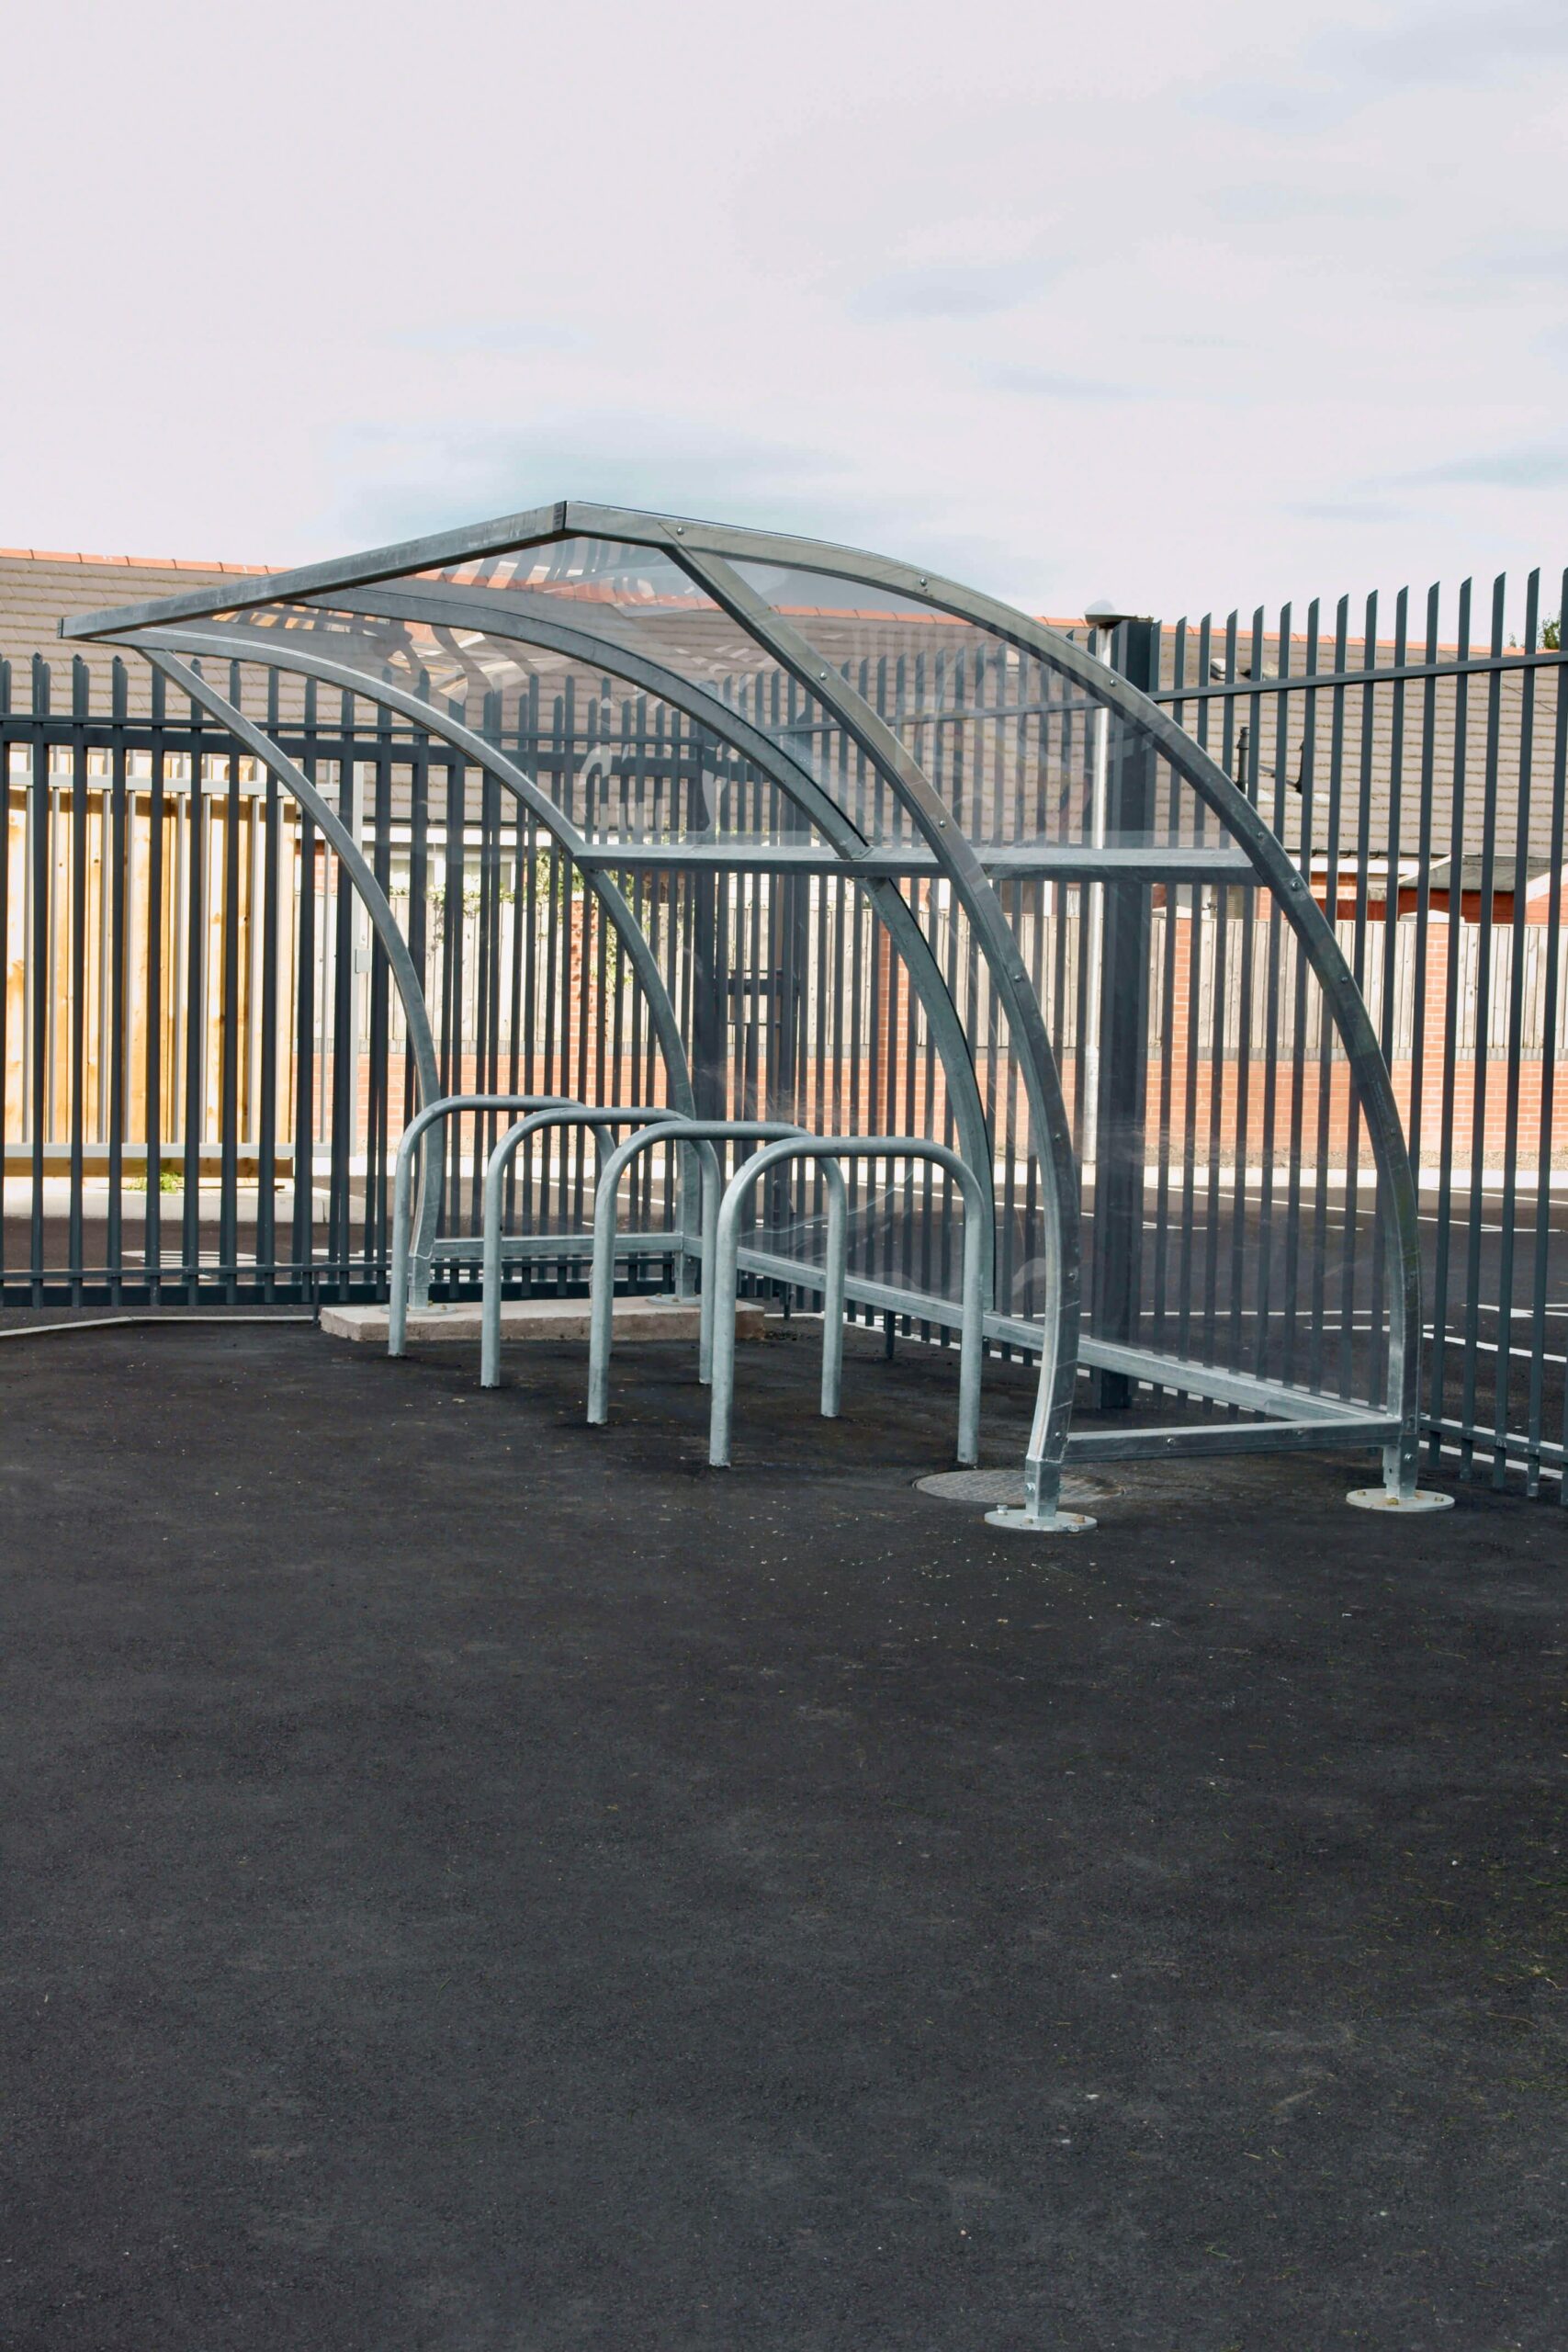 10 space moon cycle shelter with galvanised sheffield cycle stands